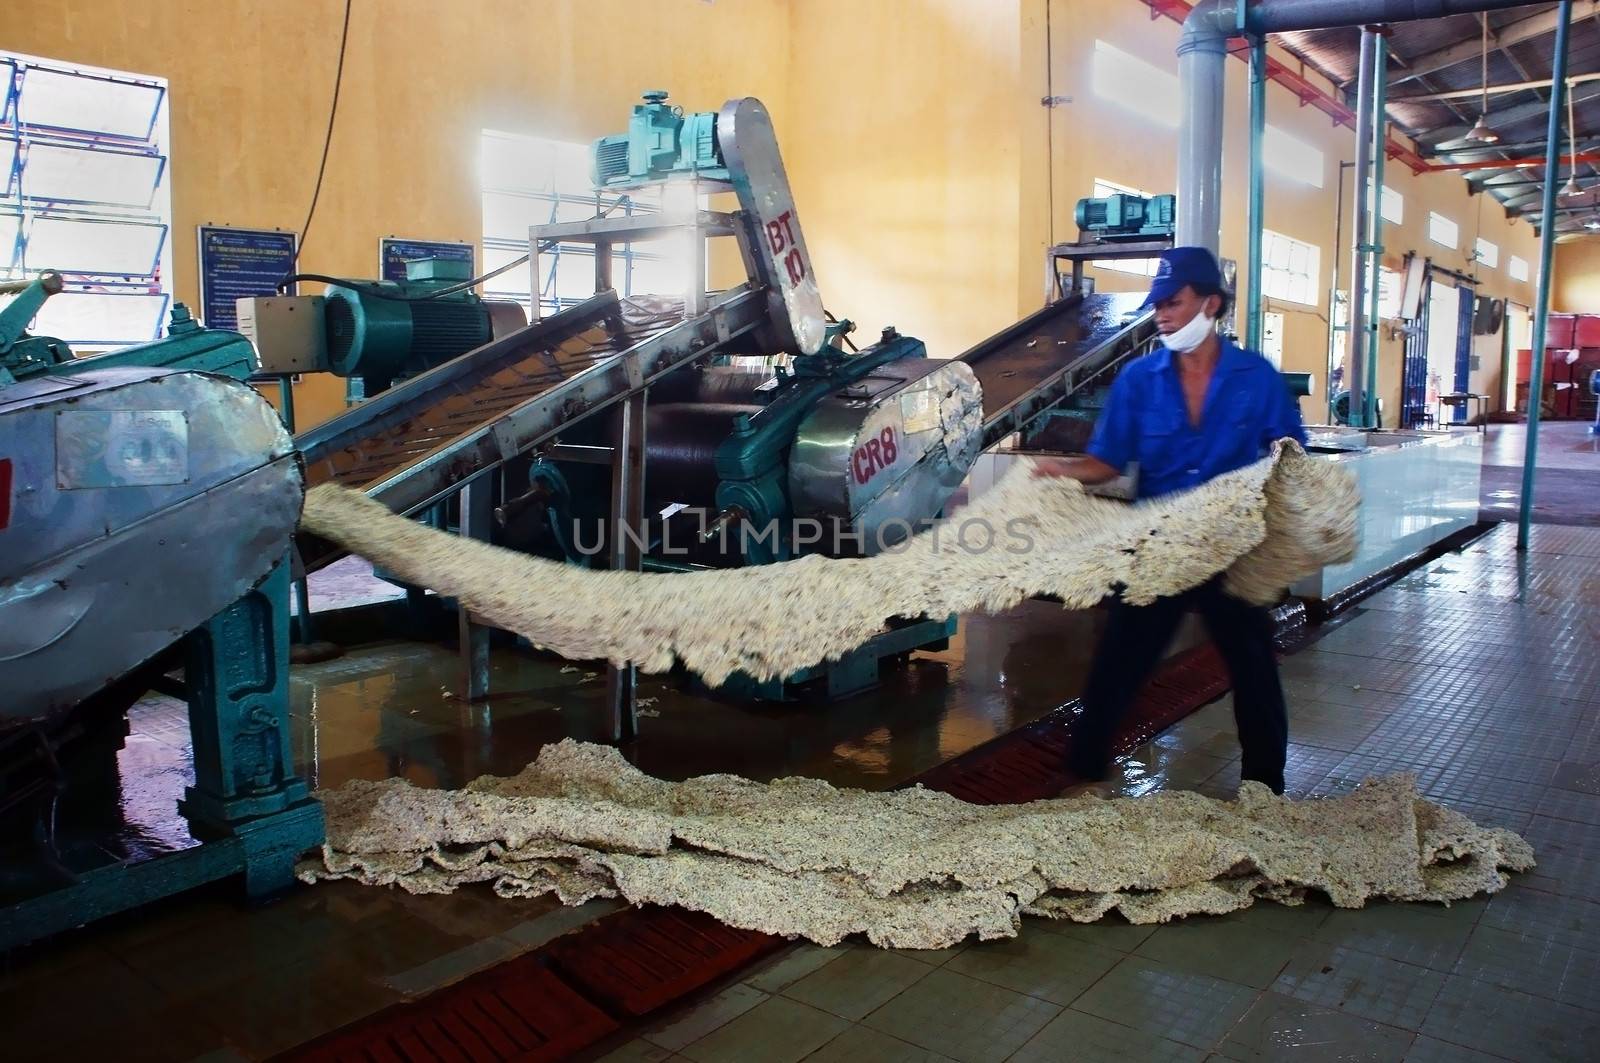 in Viet Nam, there are many rubber plantation, rubber latex after collected, transport to factory.Right here, prelimitary treatment processing in ten stage, this is the fifth to make sheet.Binh Phuoc, Viet Nam- May 9, 2013.